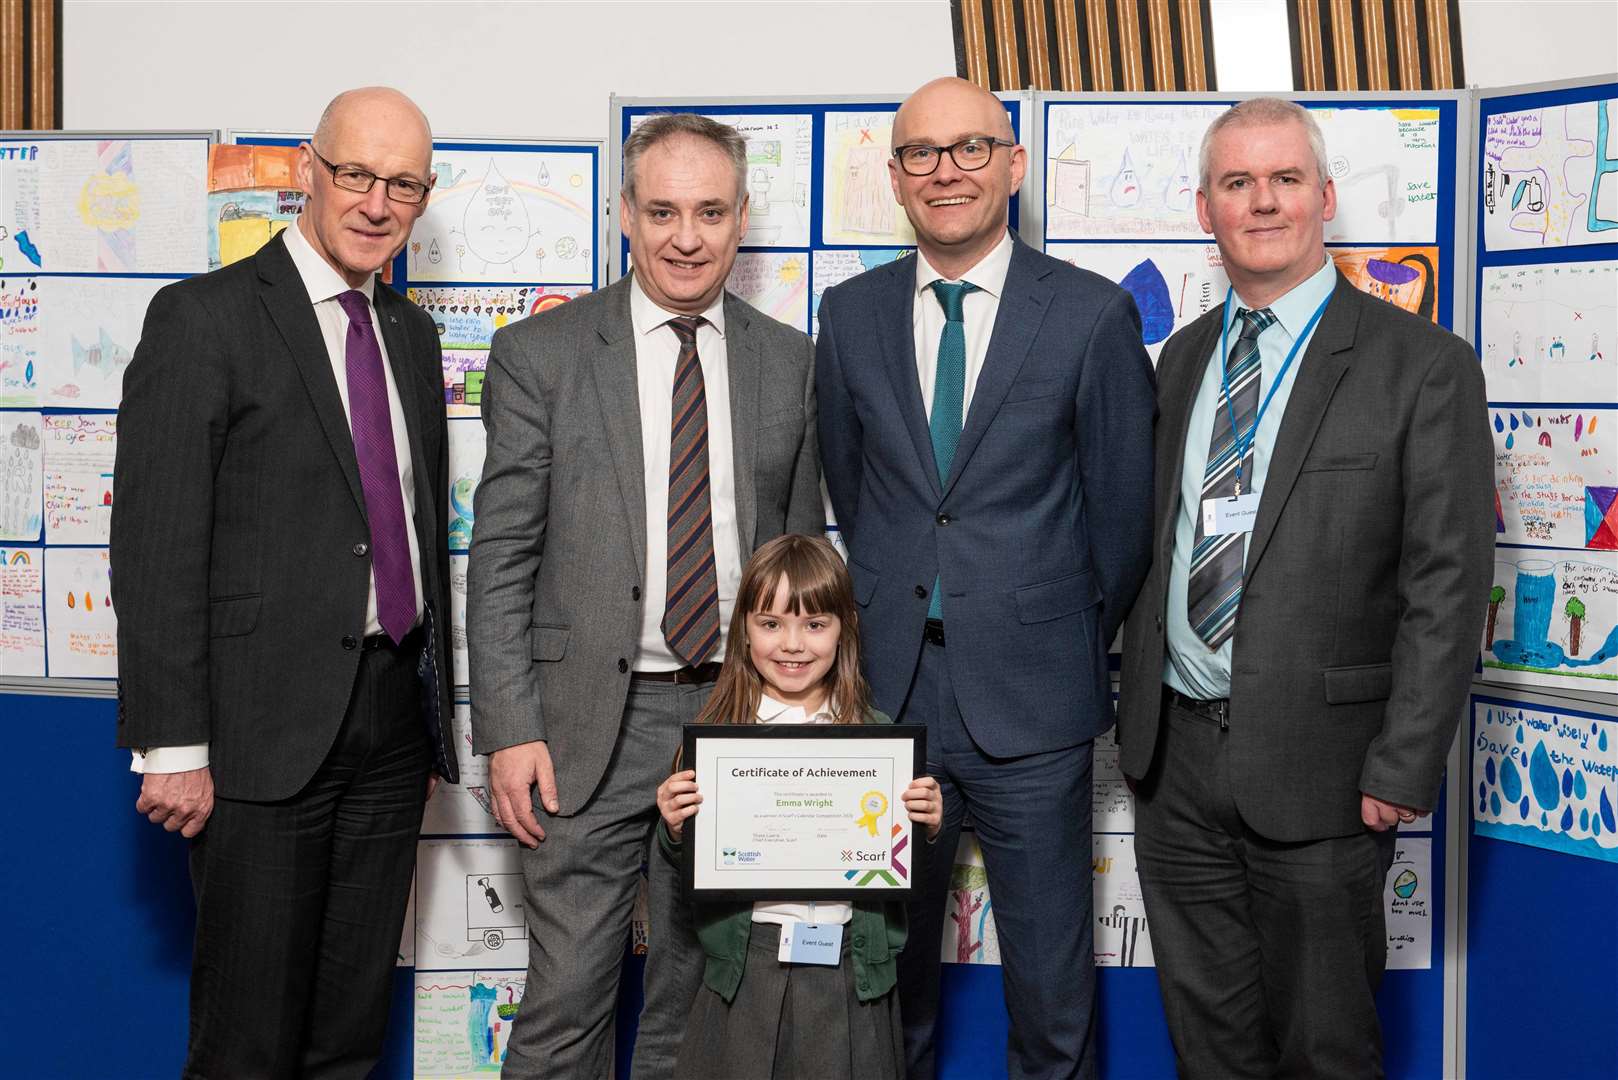 Emma Wright pictured with (from left) Deputy First Minister John Swinney, Moray MSP Richard Lochhead, Brian Lironi of Scottish Water and Thane Lawrie of Scarf.